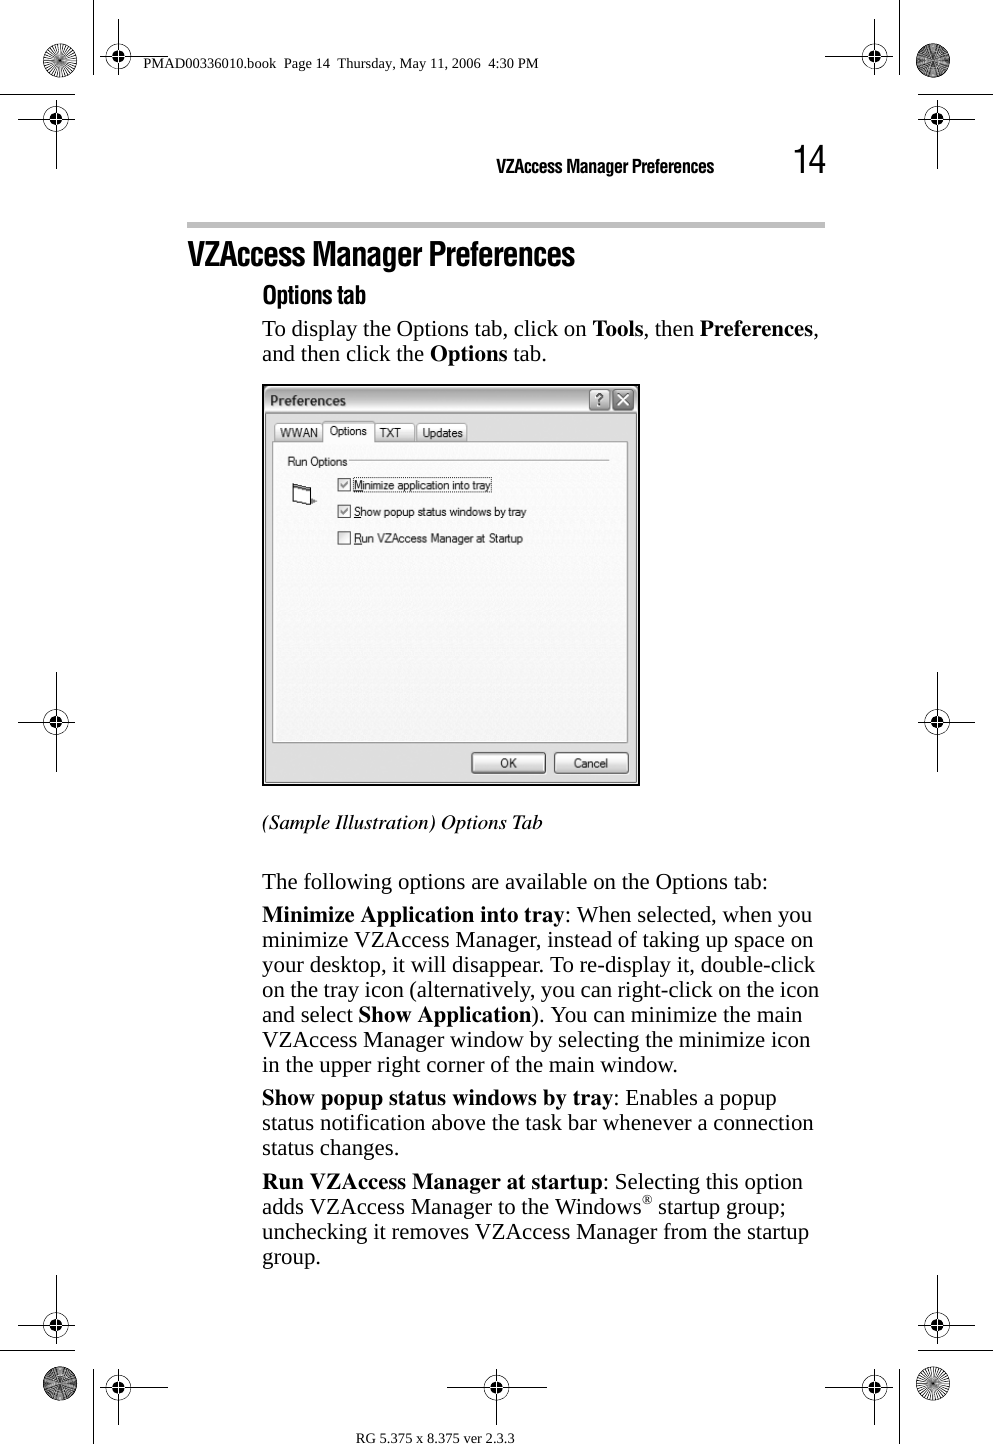 14VZAccess Manager PreferencesRG 5.375 x 8.375 ver 2.3.3VZAccess Manager PreferencesOptions tabTo display the Options tab, click on Tools, then Preferences, and then click the Options tab.(Sample Illustration) Options TabThe following options are available on the Options tab:Minimize Application into tray: When selected, when you minimize VZAccess Manager, instead of taking up space on your desktop, it will disappear. To re-display it, double-click on the tray icon (alternatively, you can right-click on the icon and select Show Application). You can minimize the main VZAccess Manager window by selecting the minimize icon in the upper right corner of the main window.Show popup status windows by tray: Enables a popup status notification above the task bar whenever a connection status changes.Run VZAccess Manager at startup: Selecting this option adds VZAccess Manager to the Windows® startup group; unchecking it removes VZAccess Manager from the startup group.PMAD00336010.book  Page 14  Thursday, May 11, 2006  4:30 PM